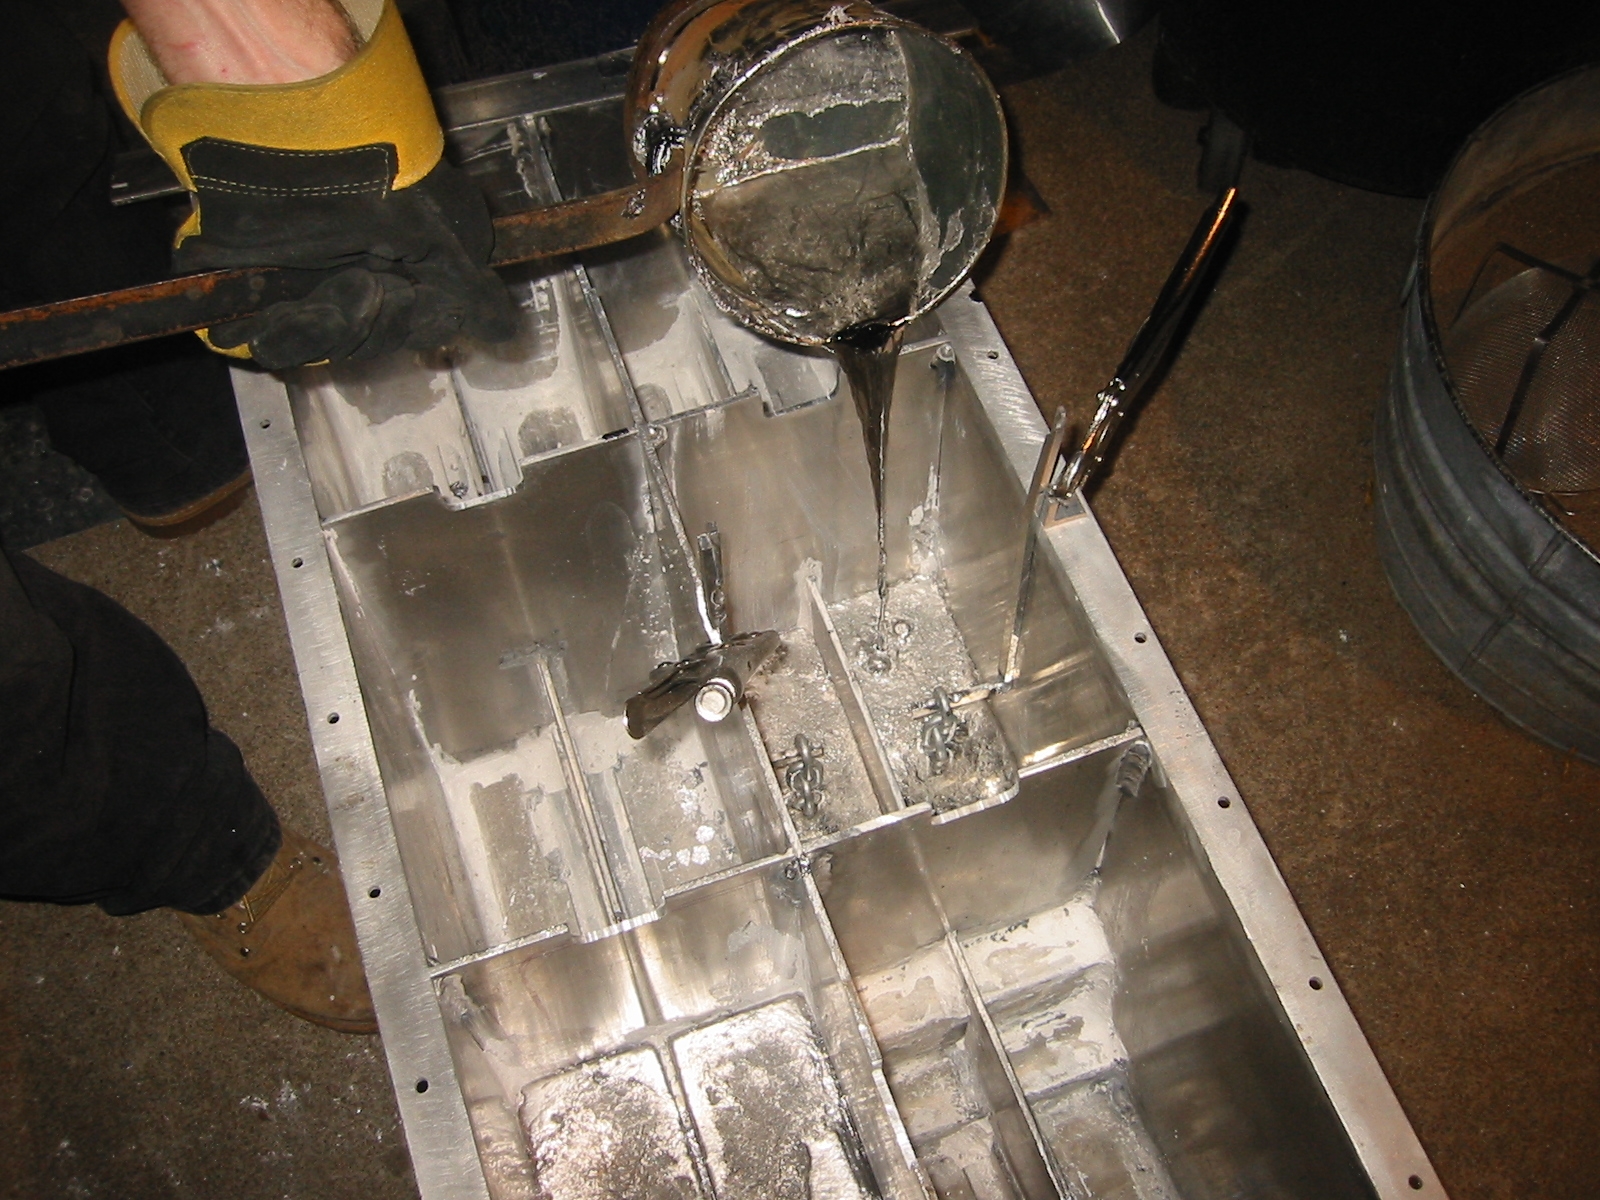 (3) Pouring molten lead into the lower compartments of theballast sled.